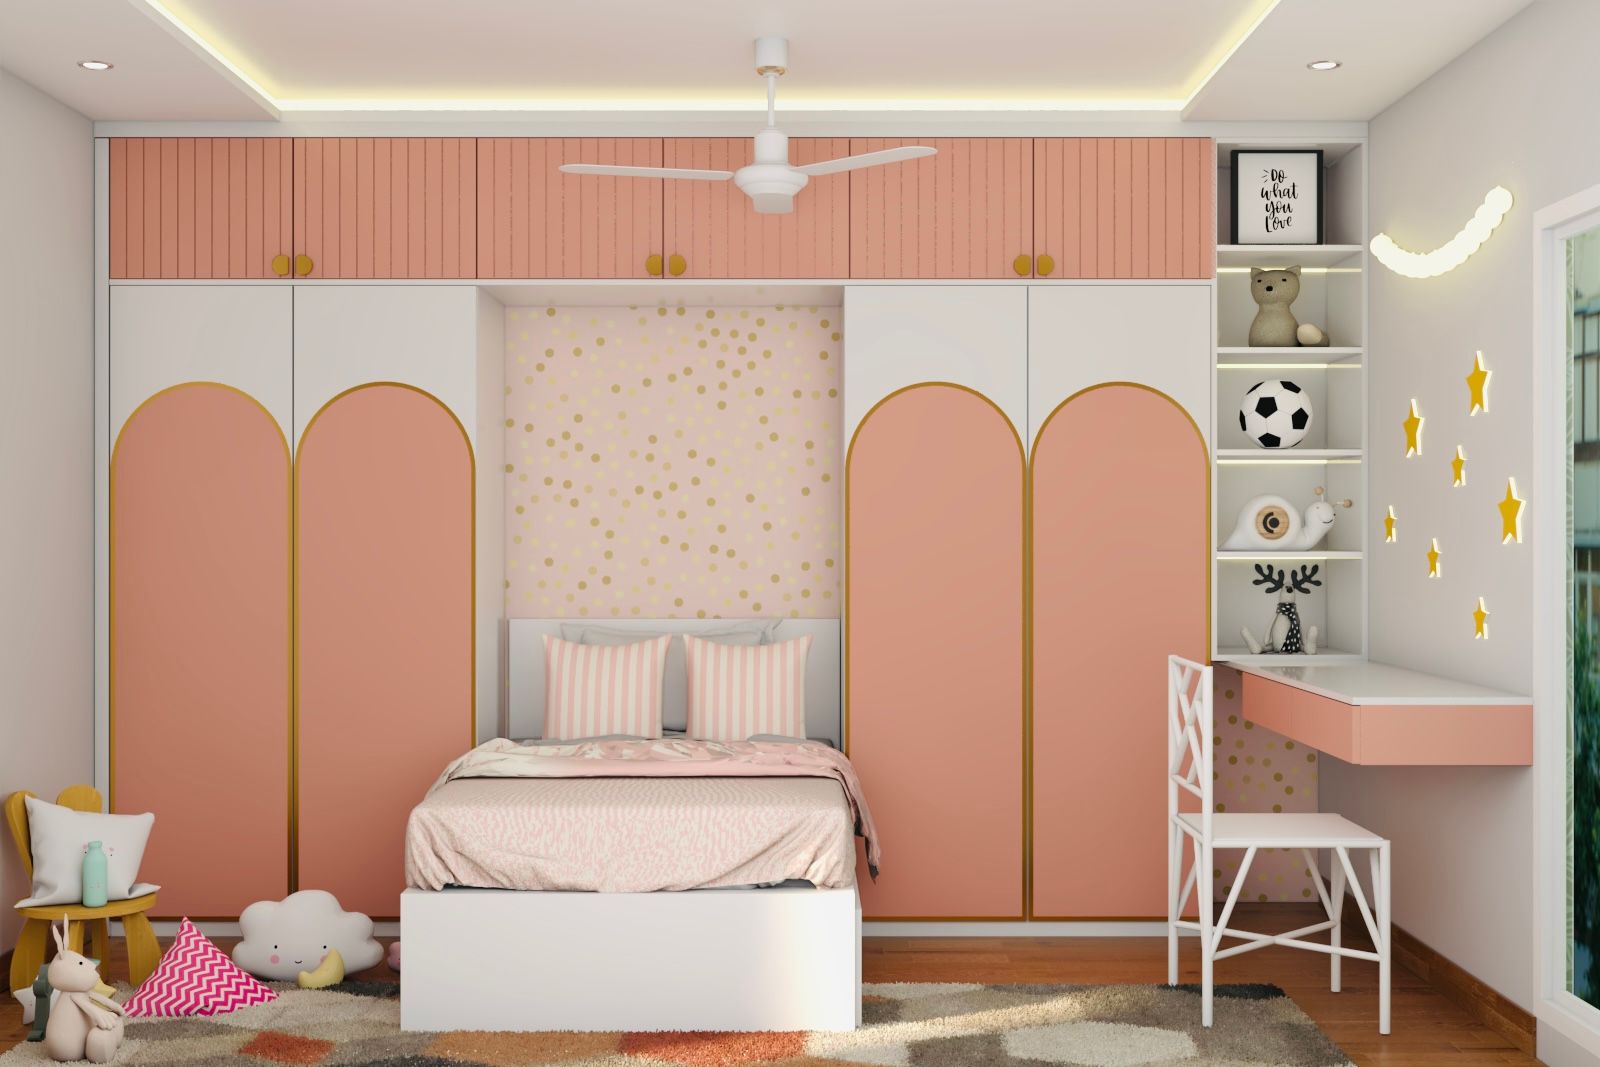 Contemporary Kids Room With A White Single Bed And White And Pink Study Unit